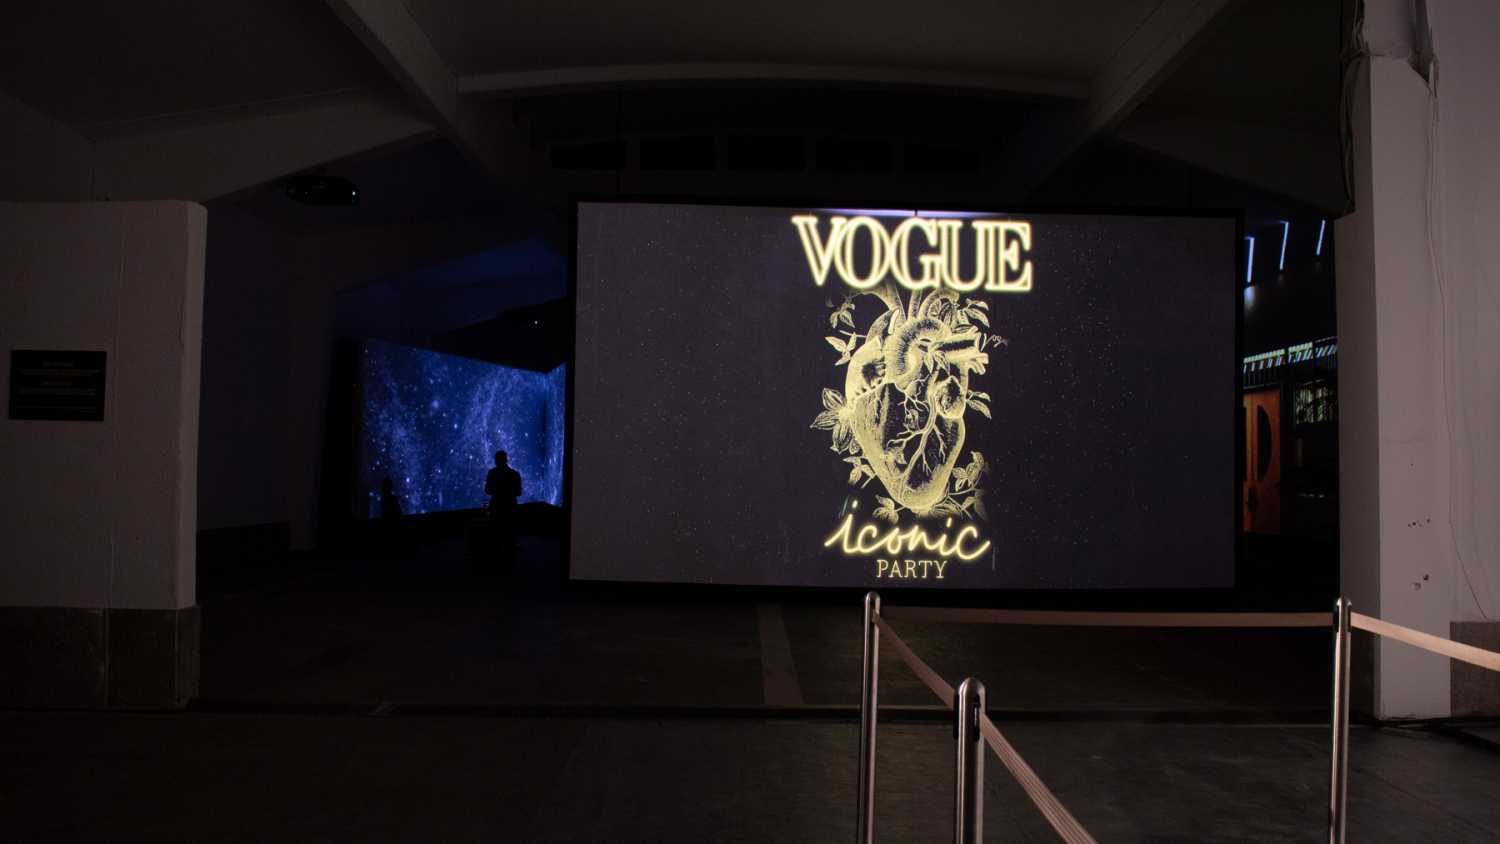 Twenty-two different projections were made on screens, walls, and floors